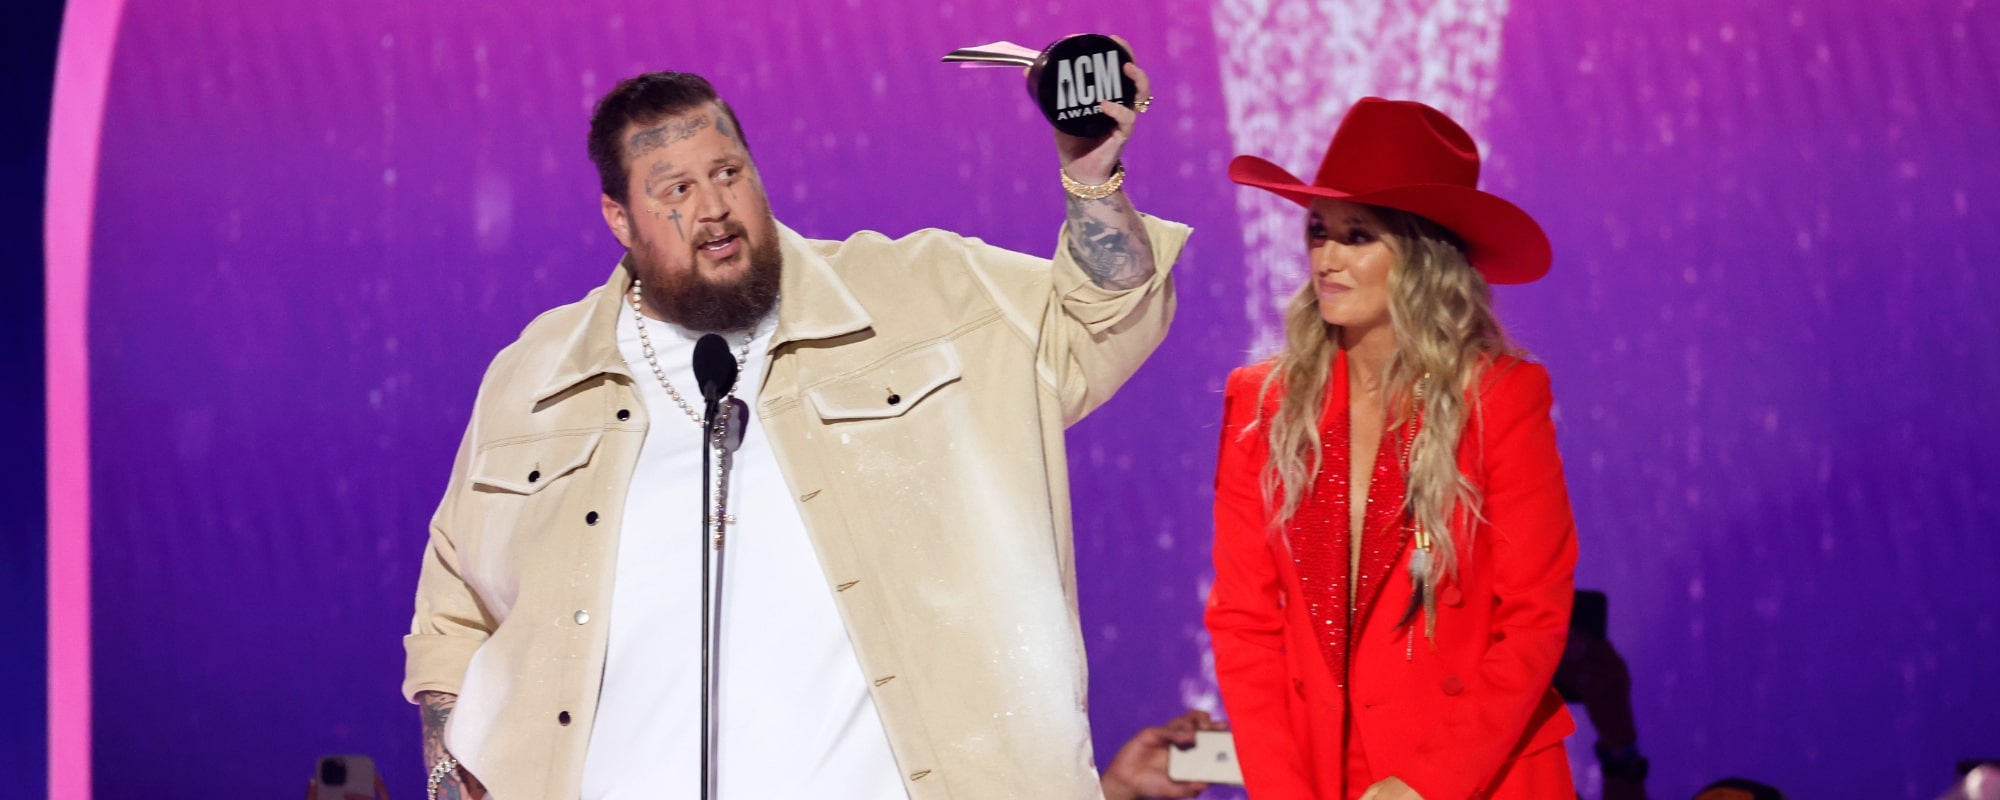 Jelly Roll and Lainey Wilson Prove They’re a Dream Team While Accepting the ACM Award for Music Event of the Year